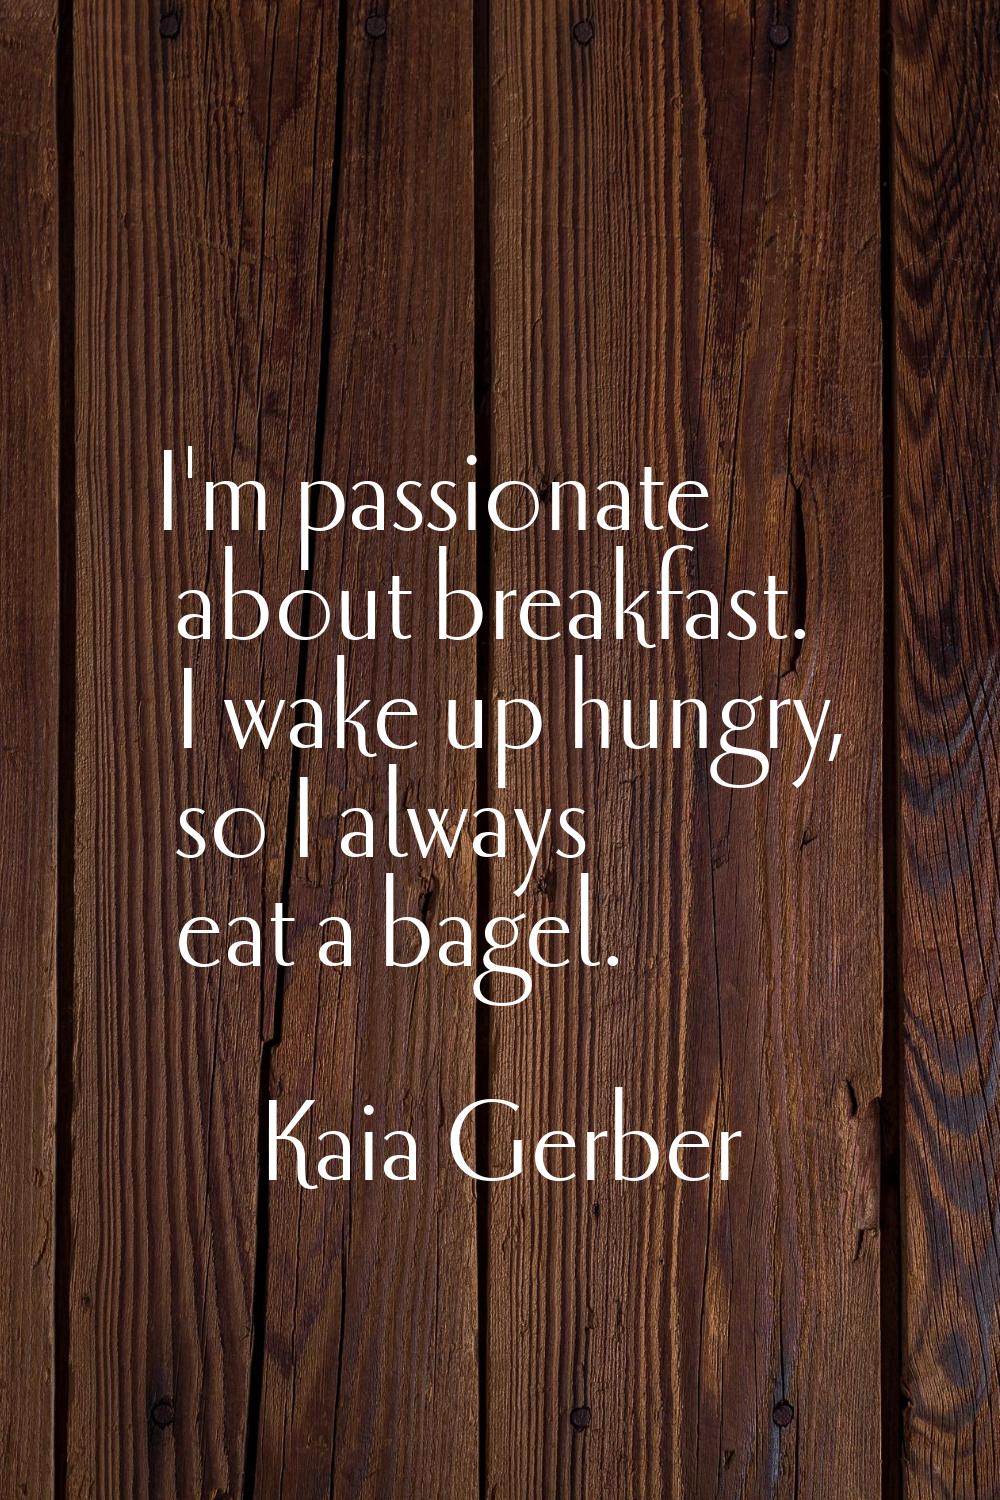 I'm passionate about breakfast. I wake up hungry, so I always eat a bagel.